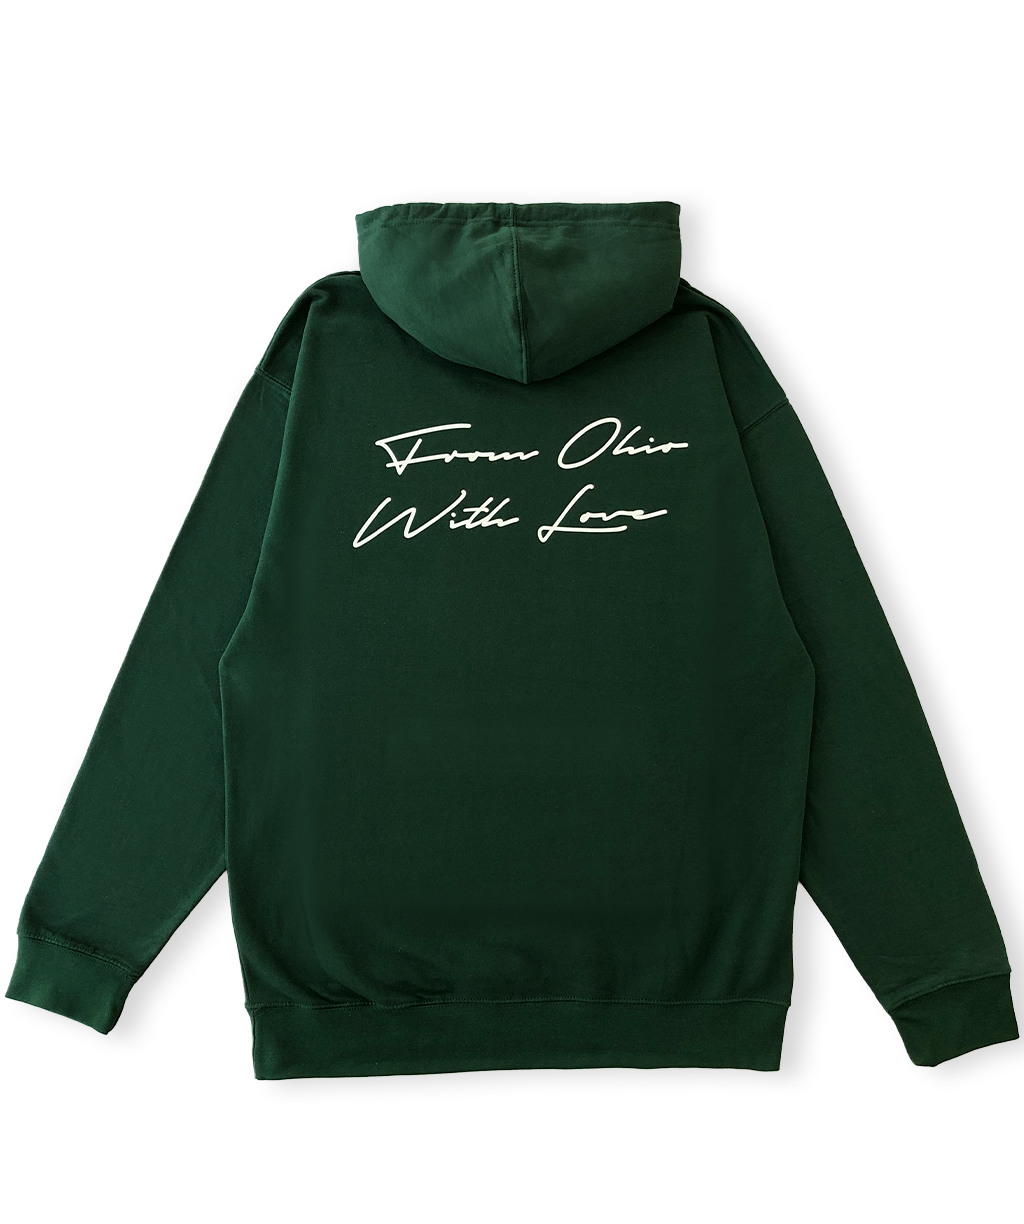 "From Ohio with Love" Hoodie (Forest Green)